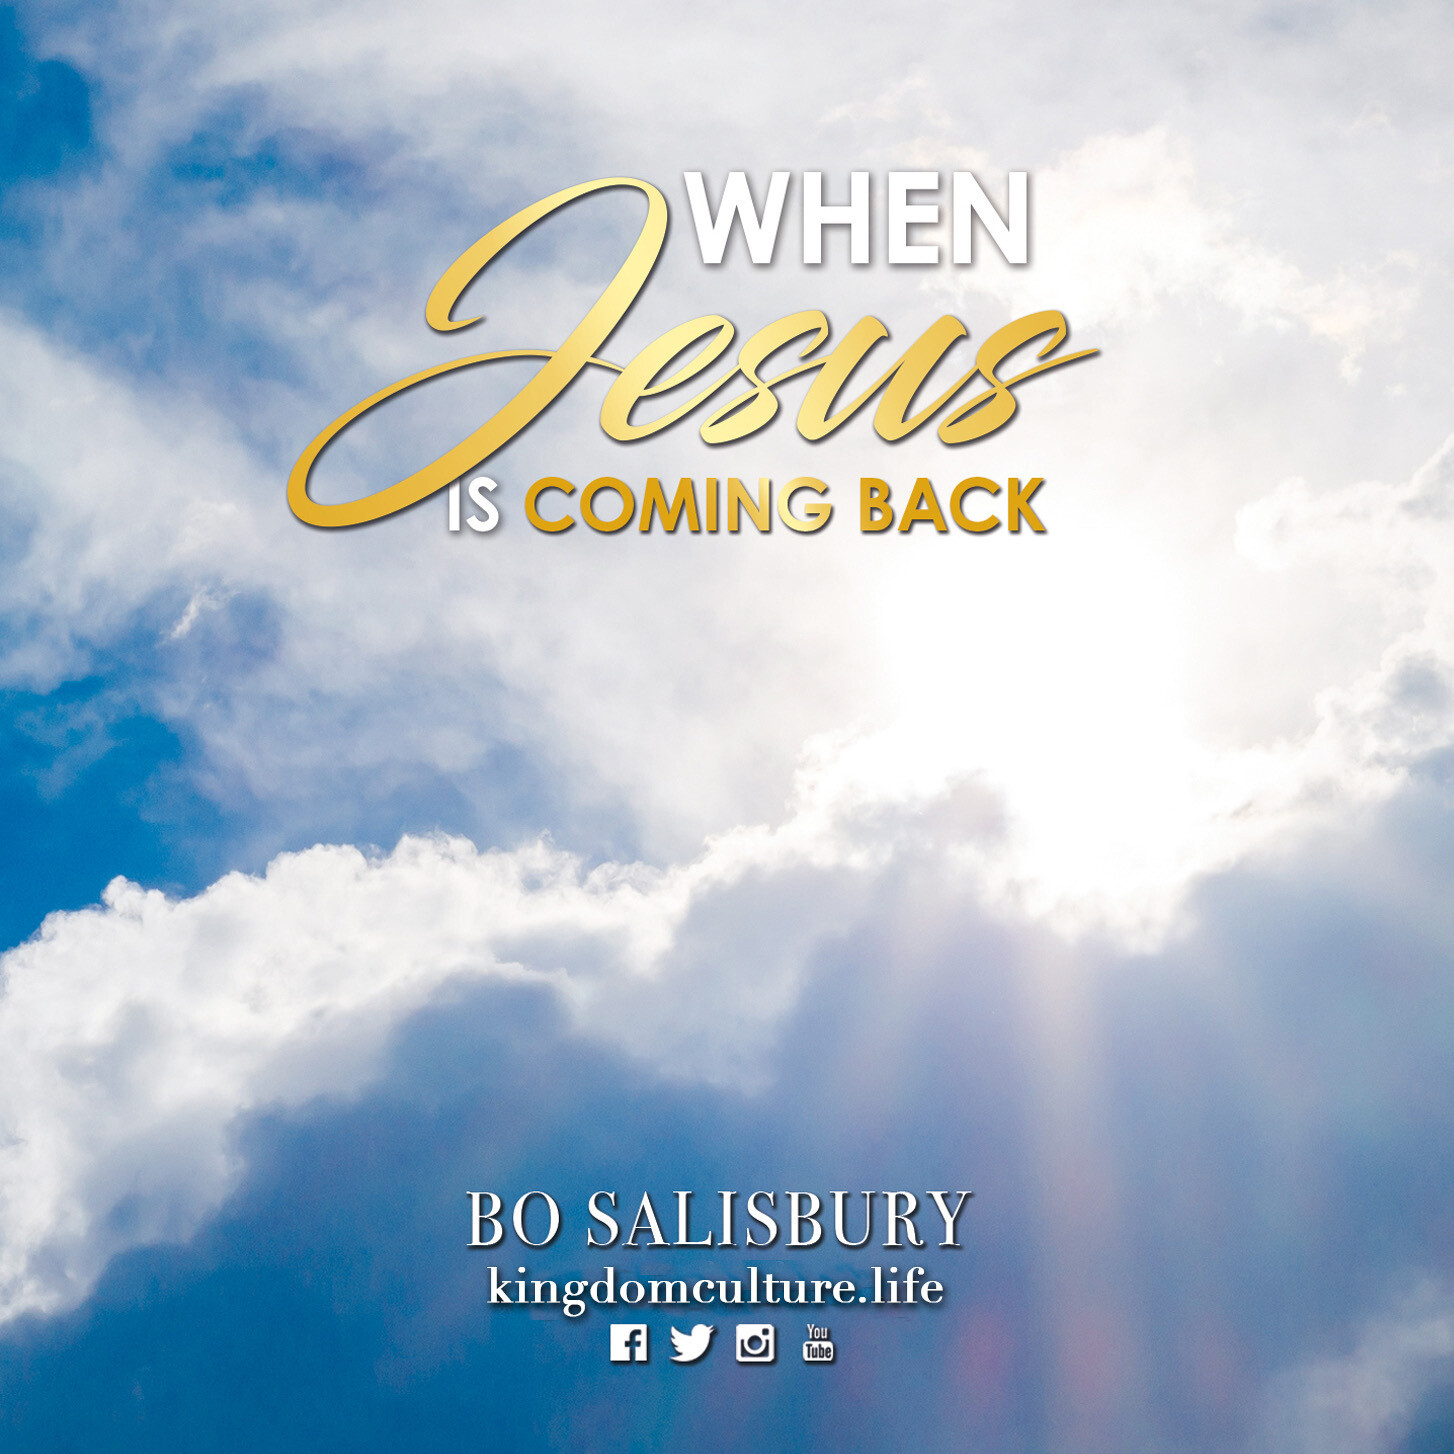 When Jesus is Coming Back (MP3 download)